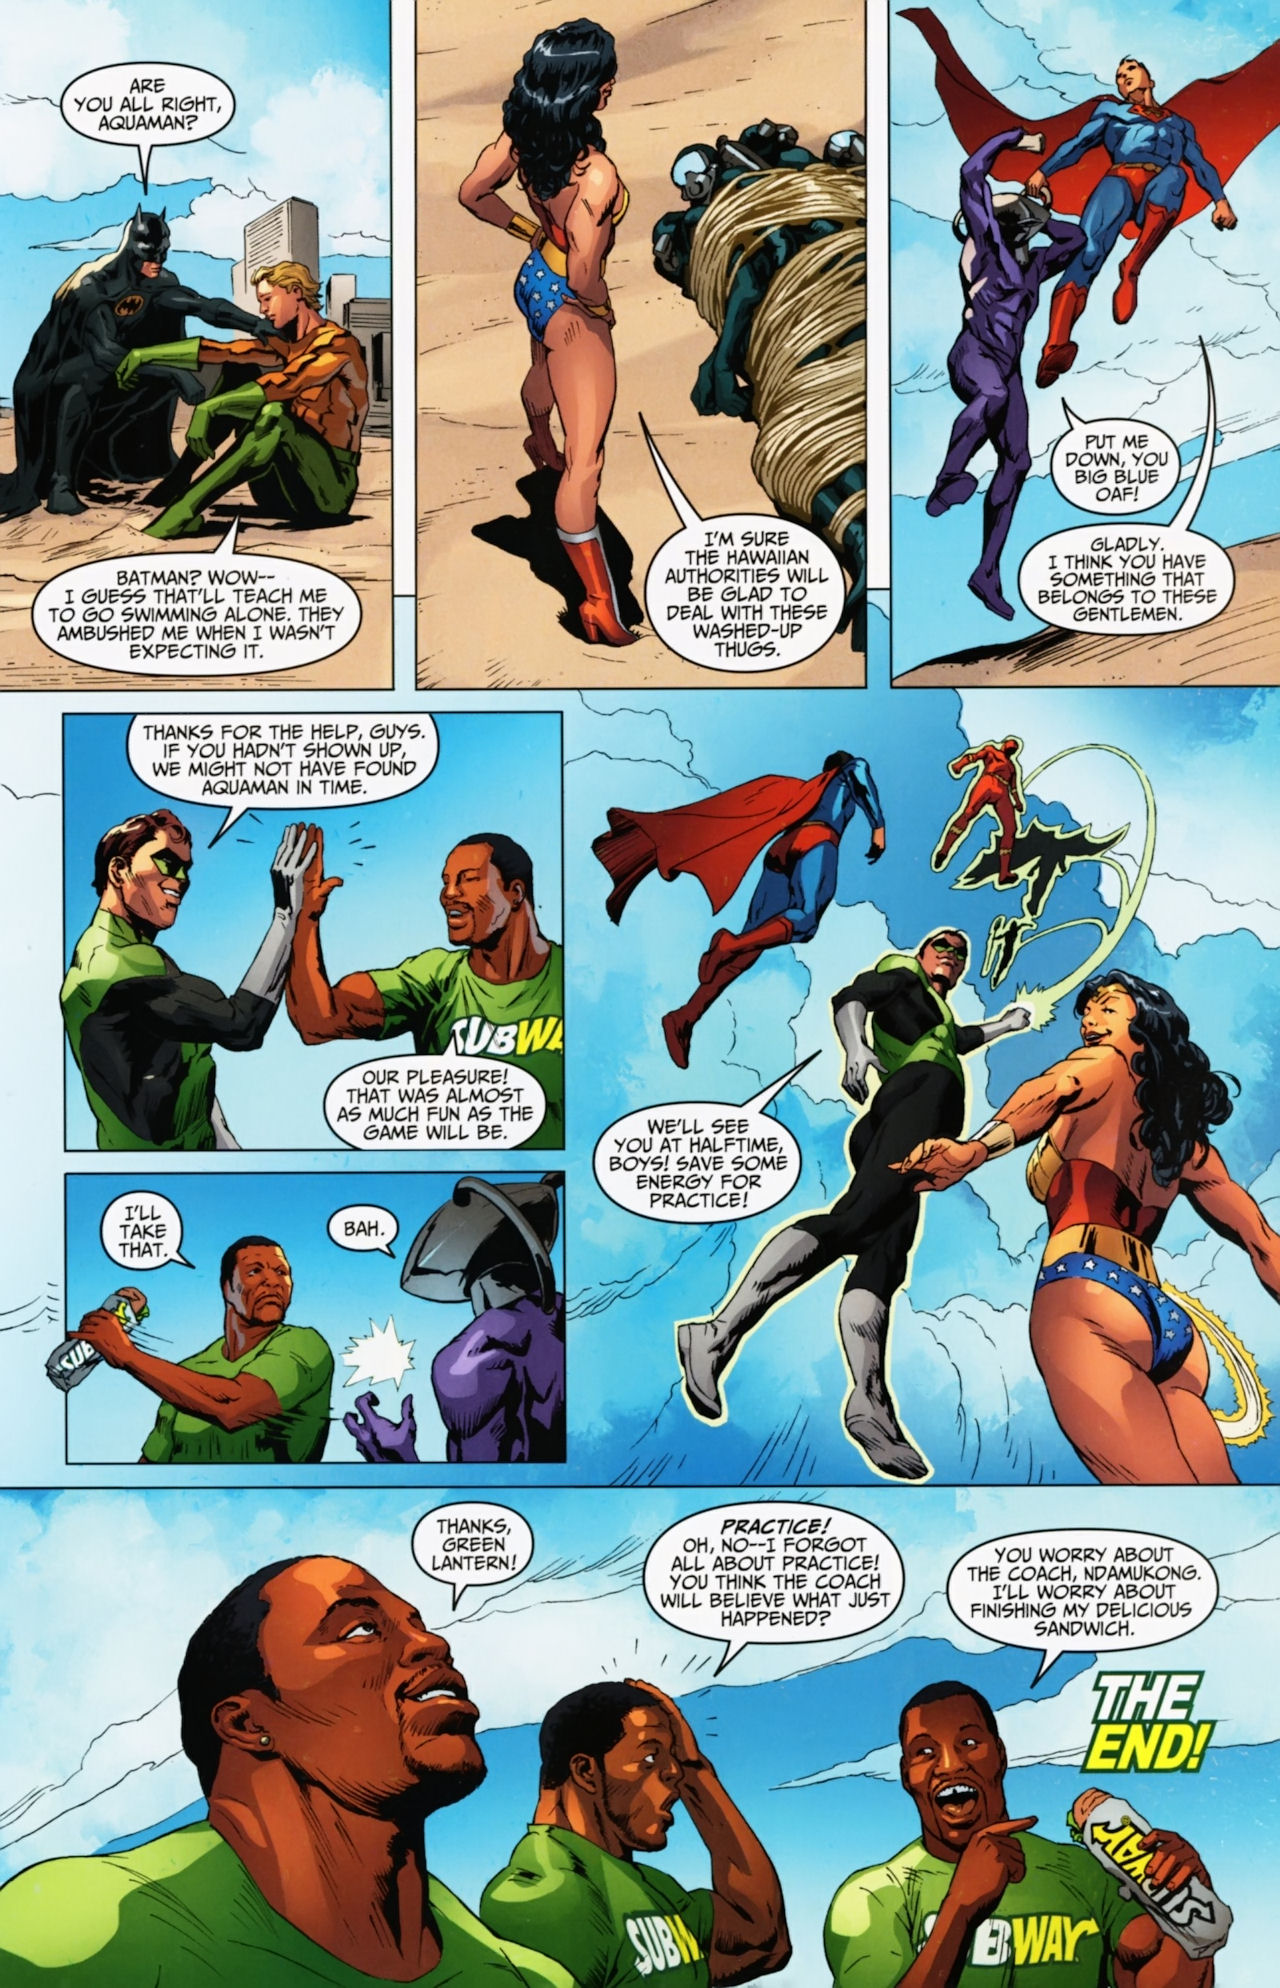 Read online Subway Presents: Justice League comic -  Issue #1 - 7